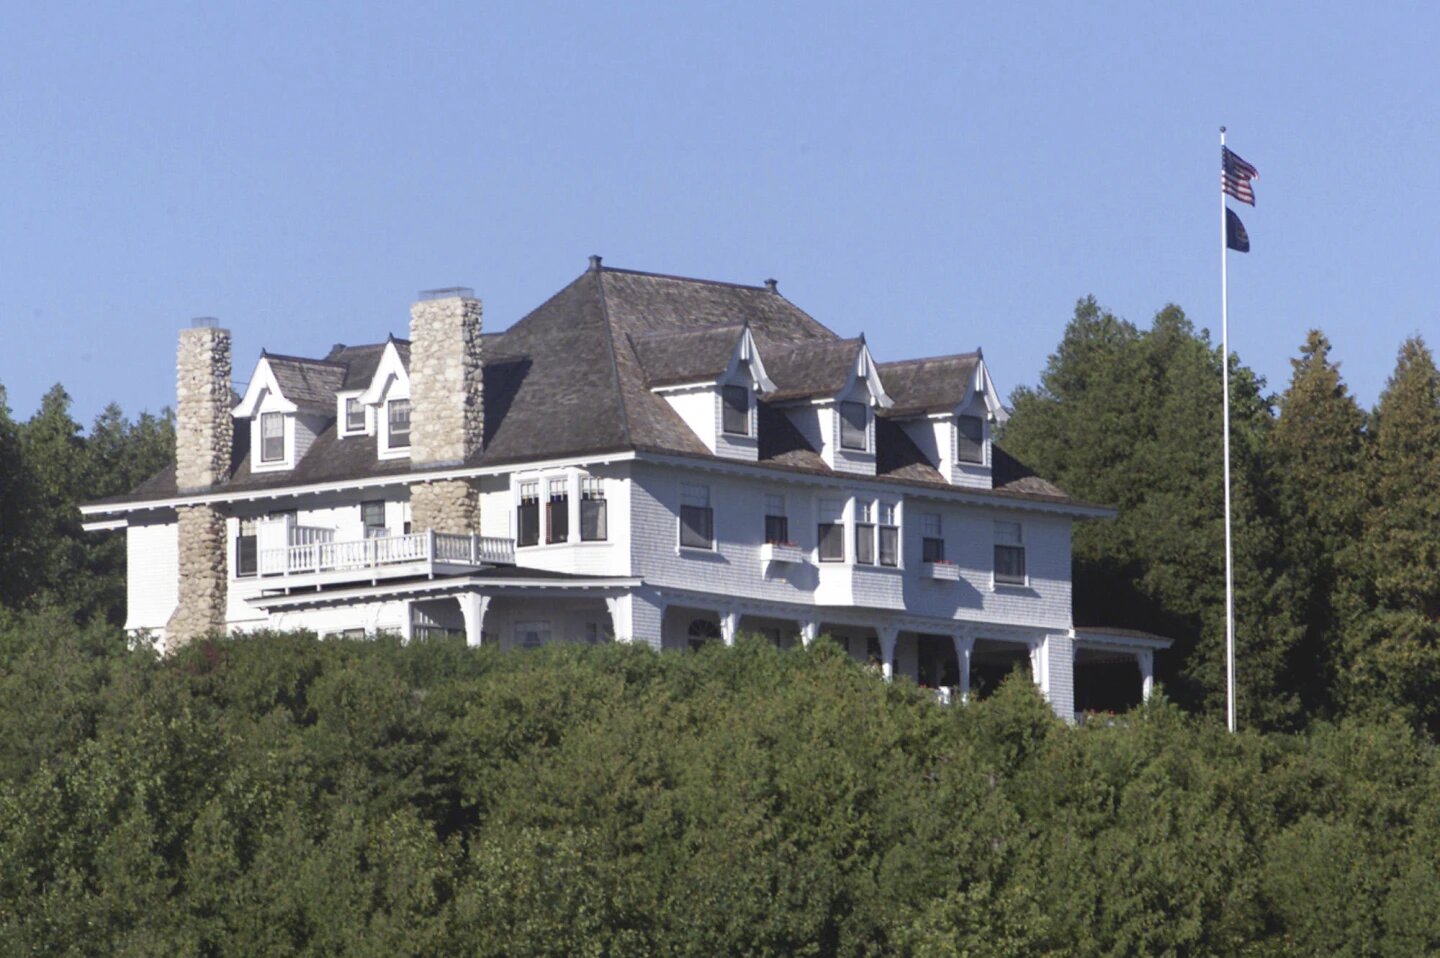 The Michigan governor's summer residence on Mackinac Island, Mich., is shown on Sept. 18, 1999.